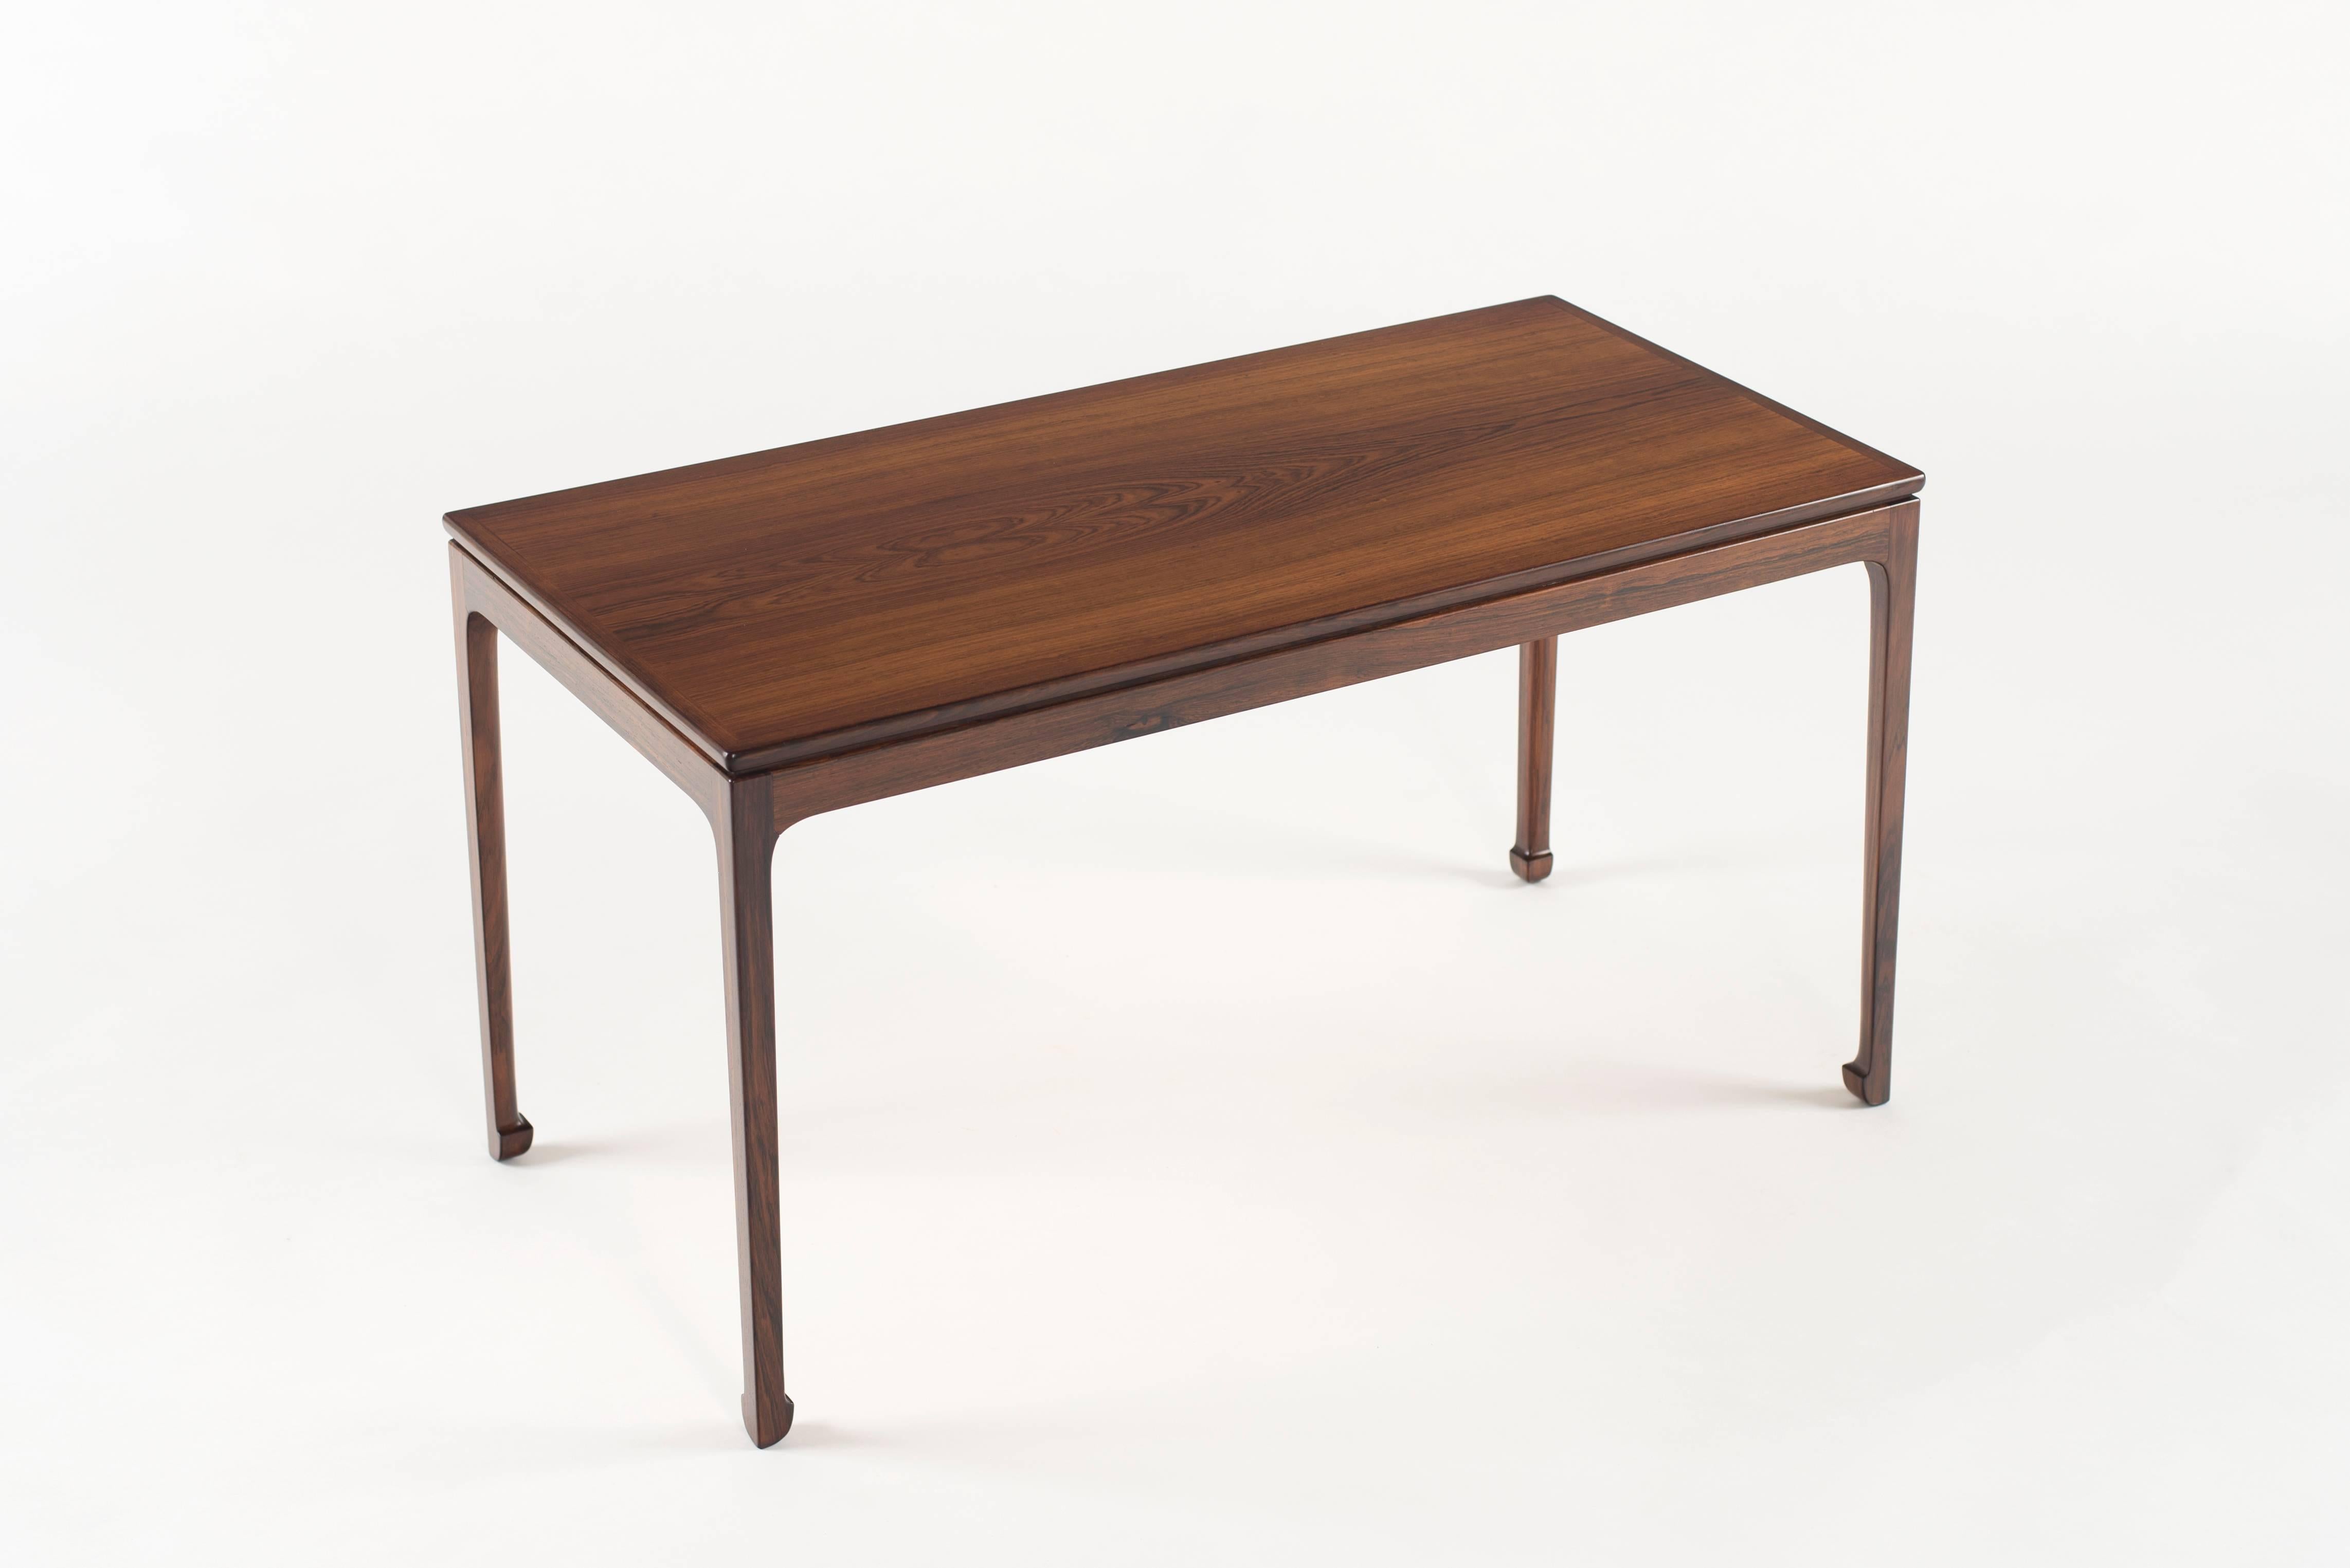 Coffee table in rosewood by Ole Wanscher, 1956. 

Executed by cabinetmaker A.J. Iversen, Copenhagen, Denmark.